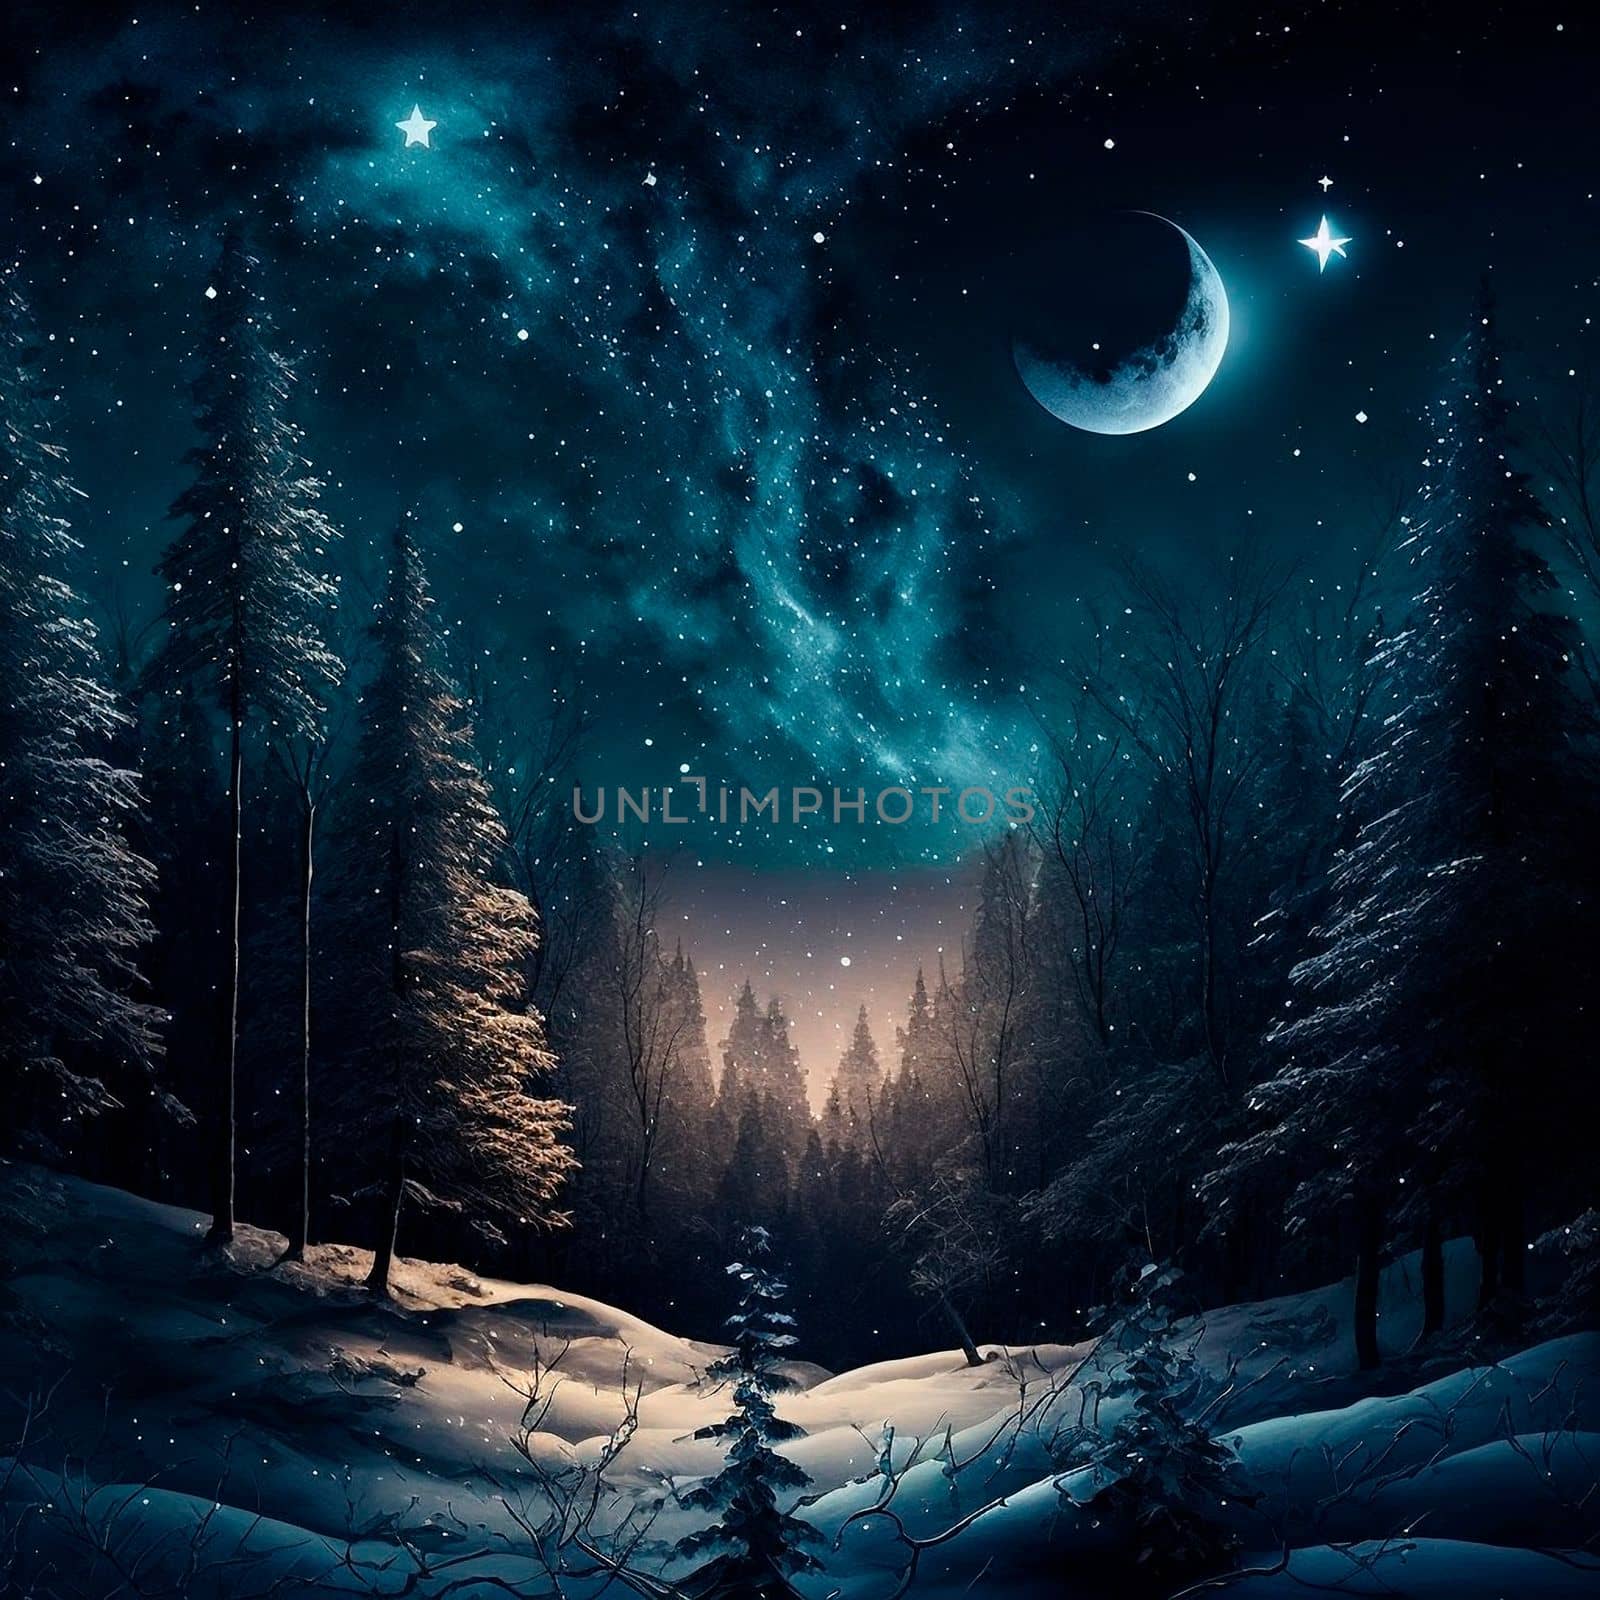 Illustration of a fabulous winter night in the forest by NeuroSky